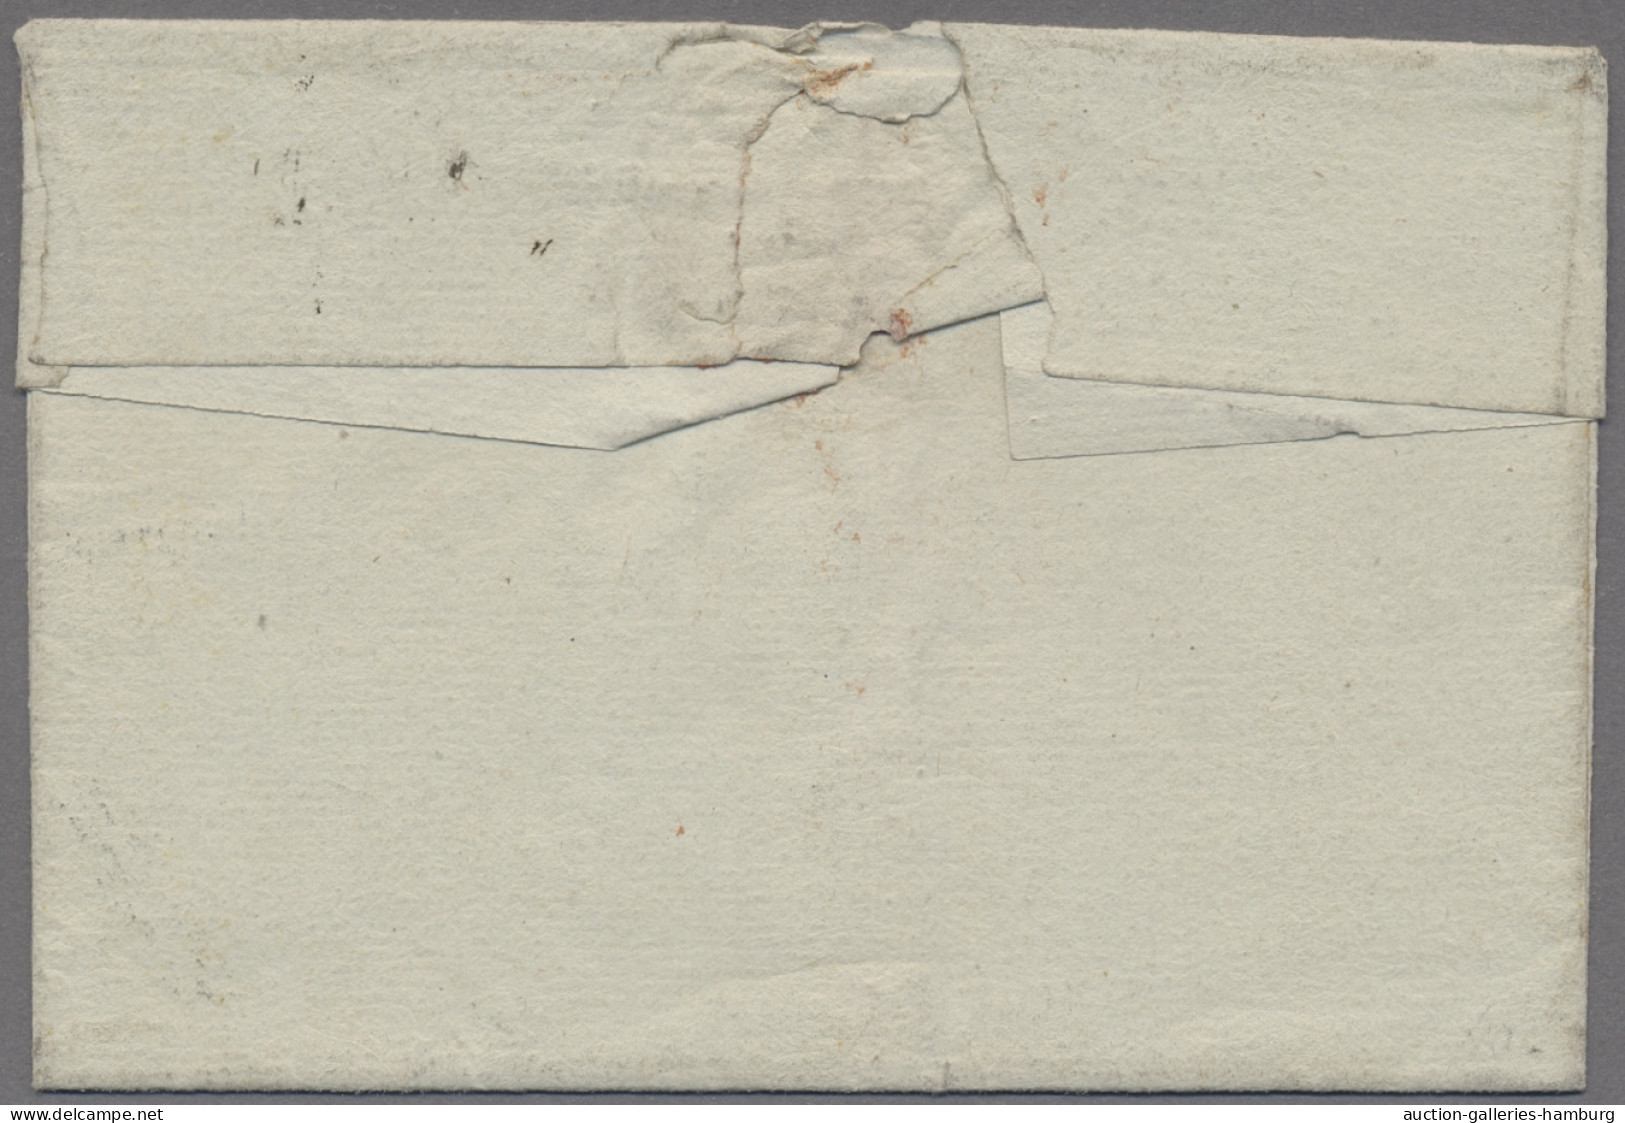 France -  Pre Adhesives  / Stampless Covers: 1788-1793, Drei Briefe "Royal Mail" - 1792-1815: Départements Conquis